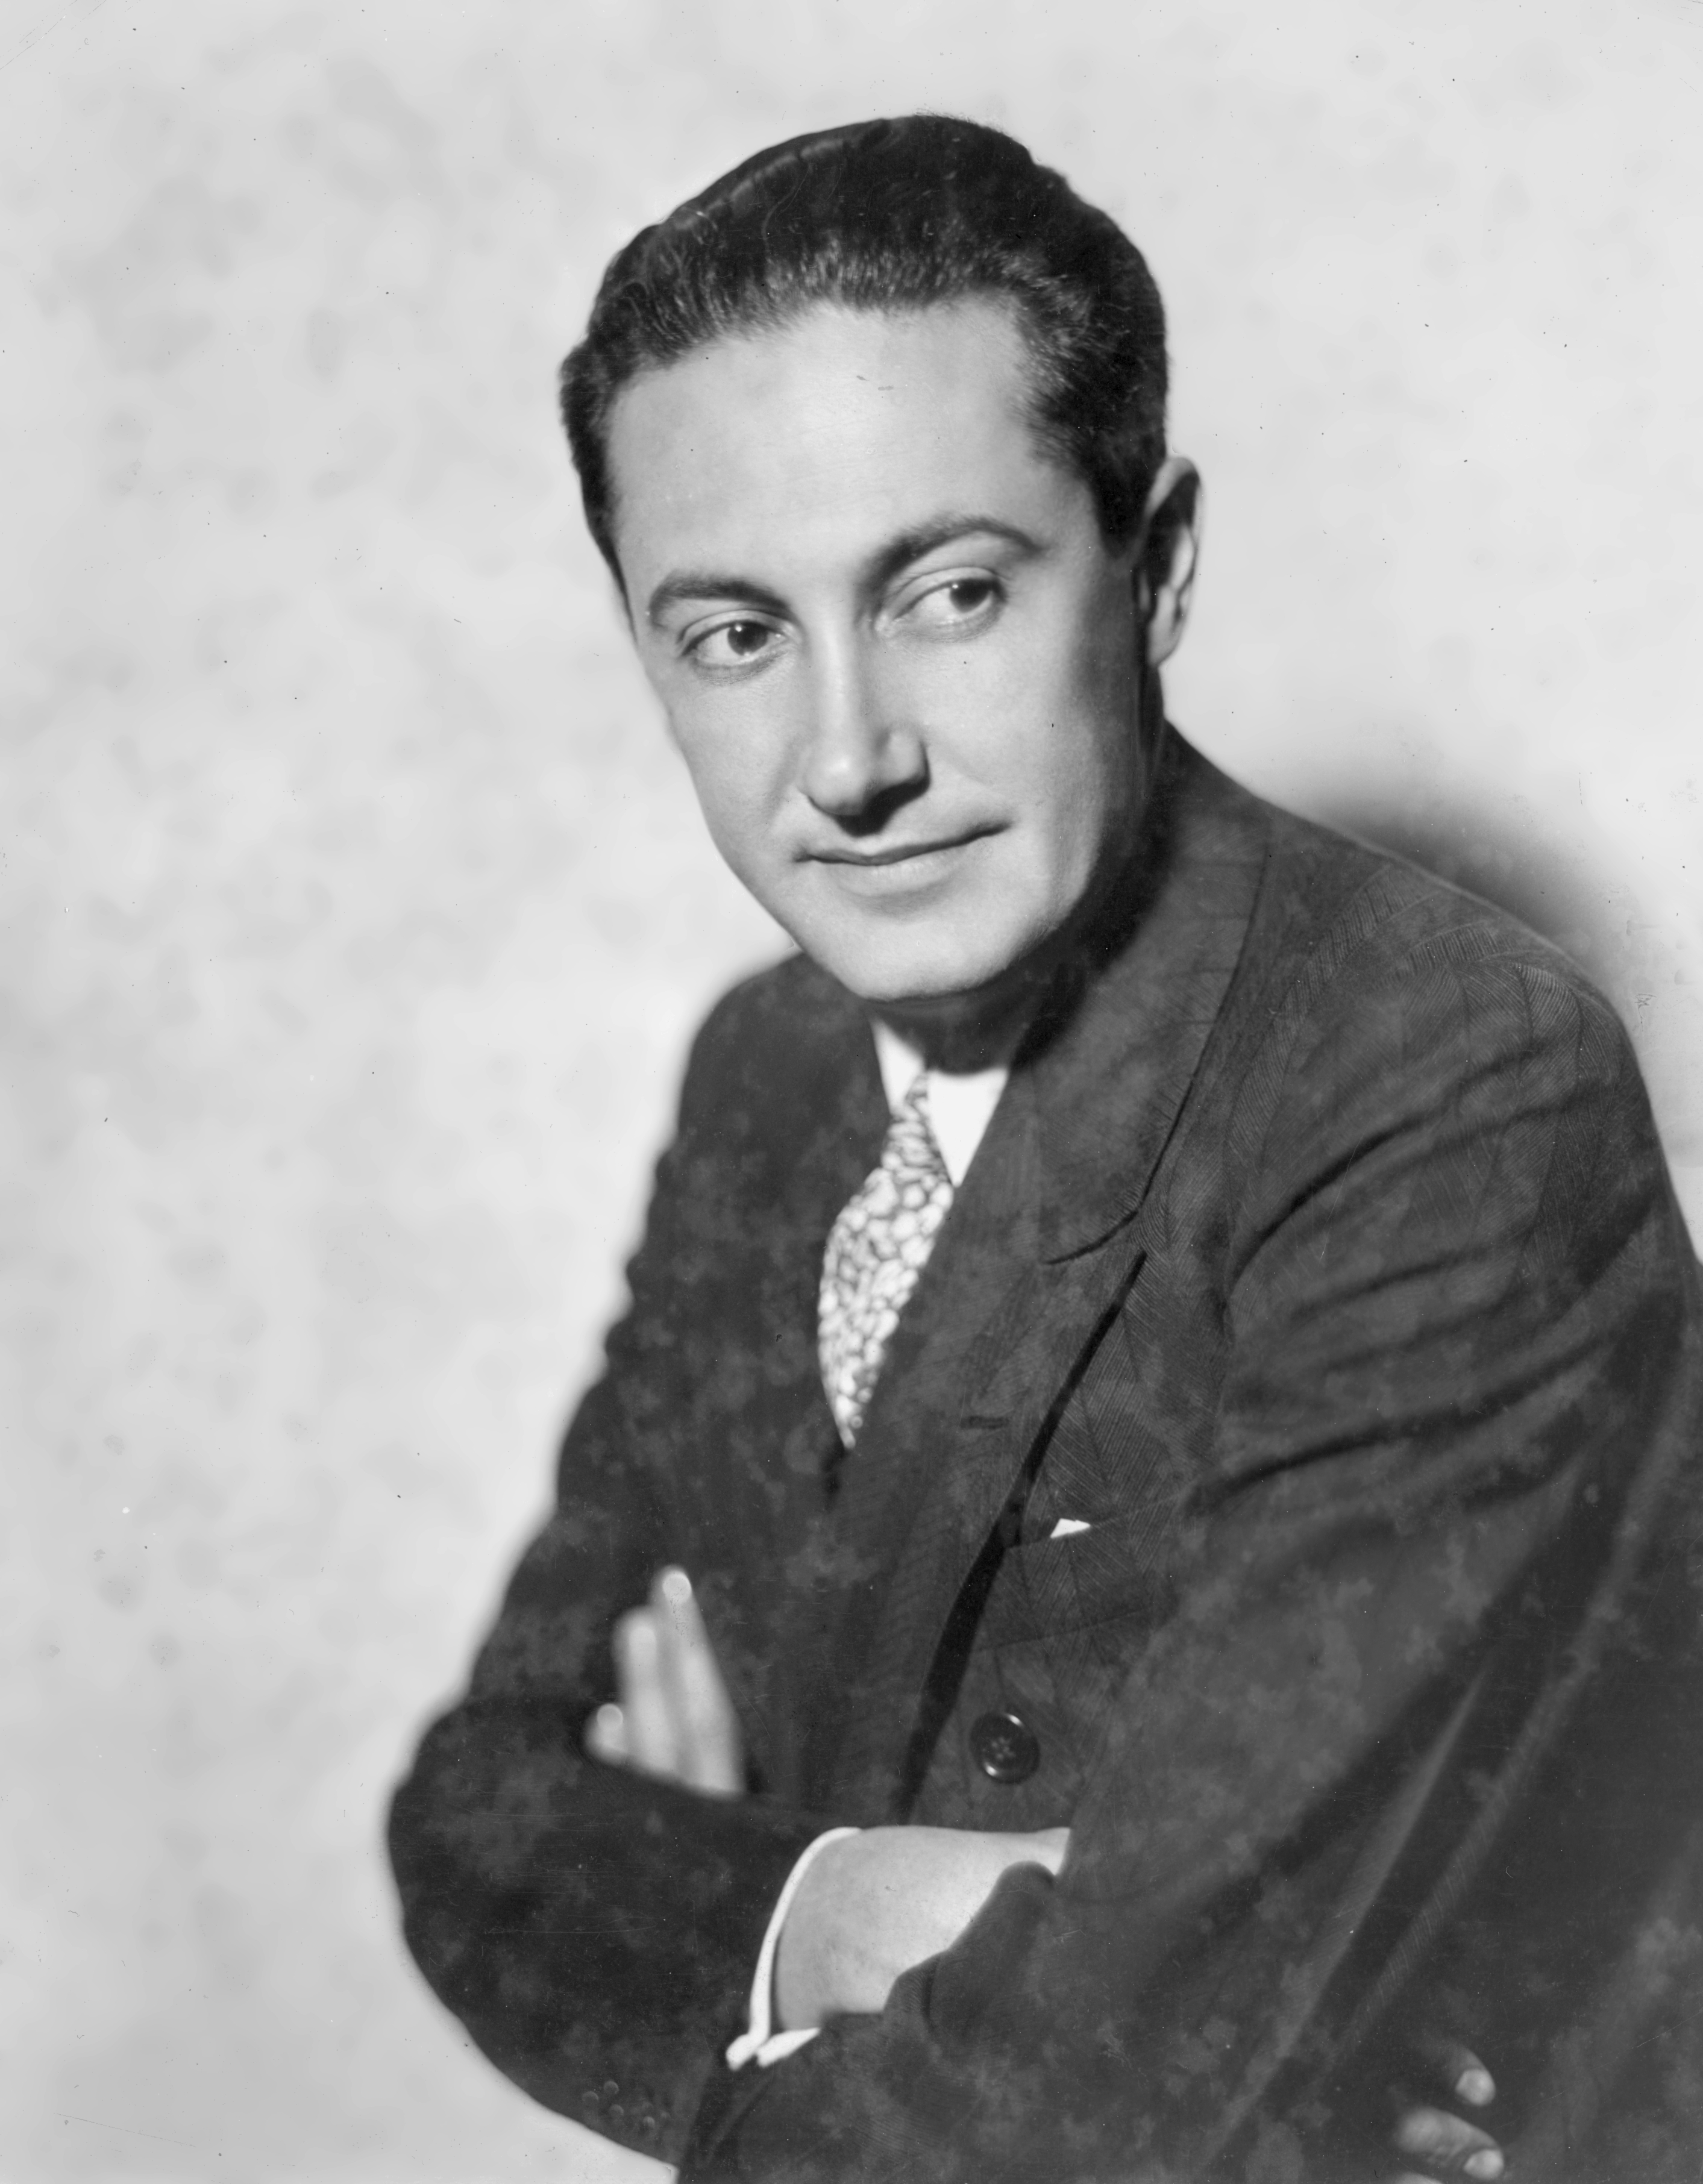 Portrait of producer and movie executive for MGM studios Irving Thalberg (1899 - 1936), circa 1932. (Getty Images)